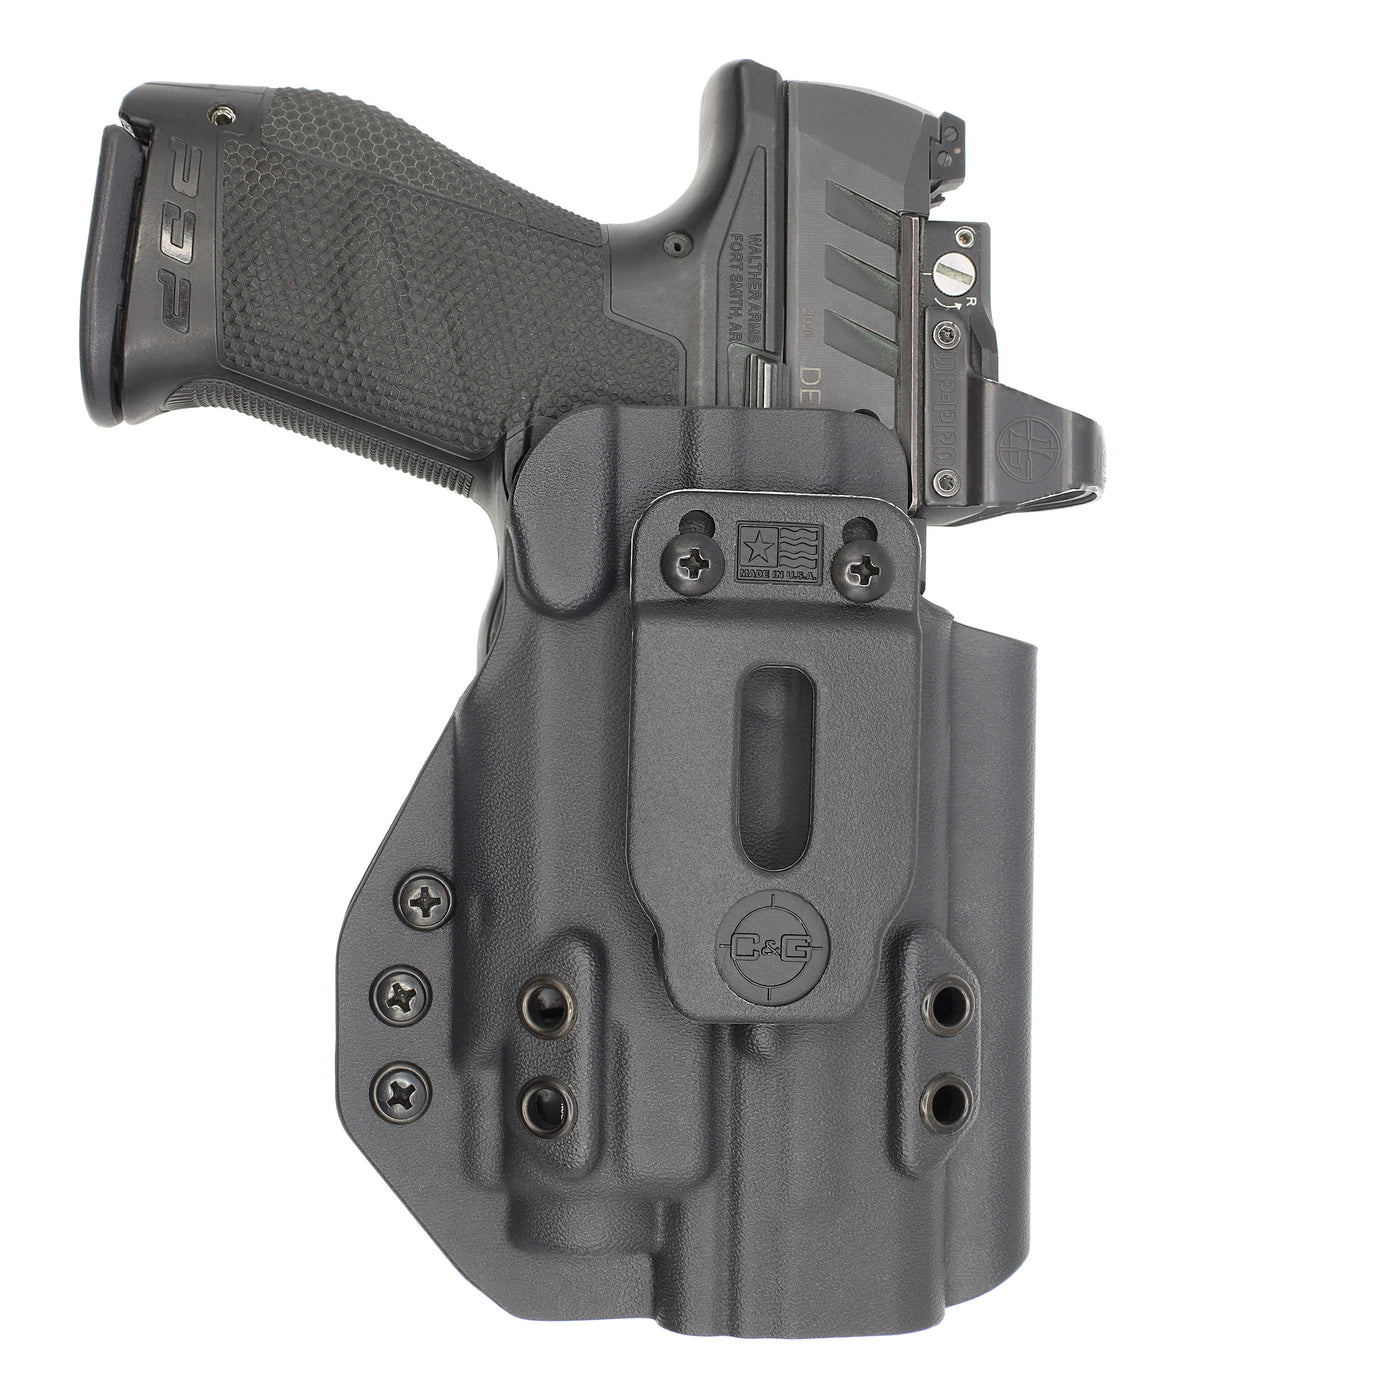 C&G Holsters quickship IWB Tactical M&P 9/40 streamlight TLR8 holstered